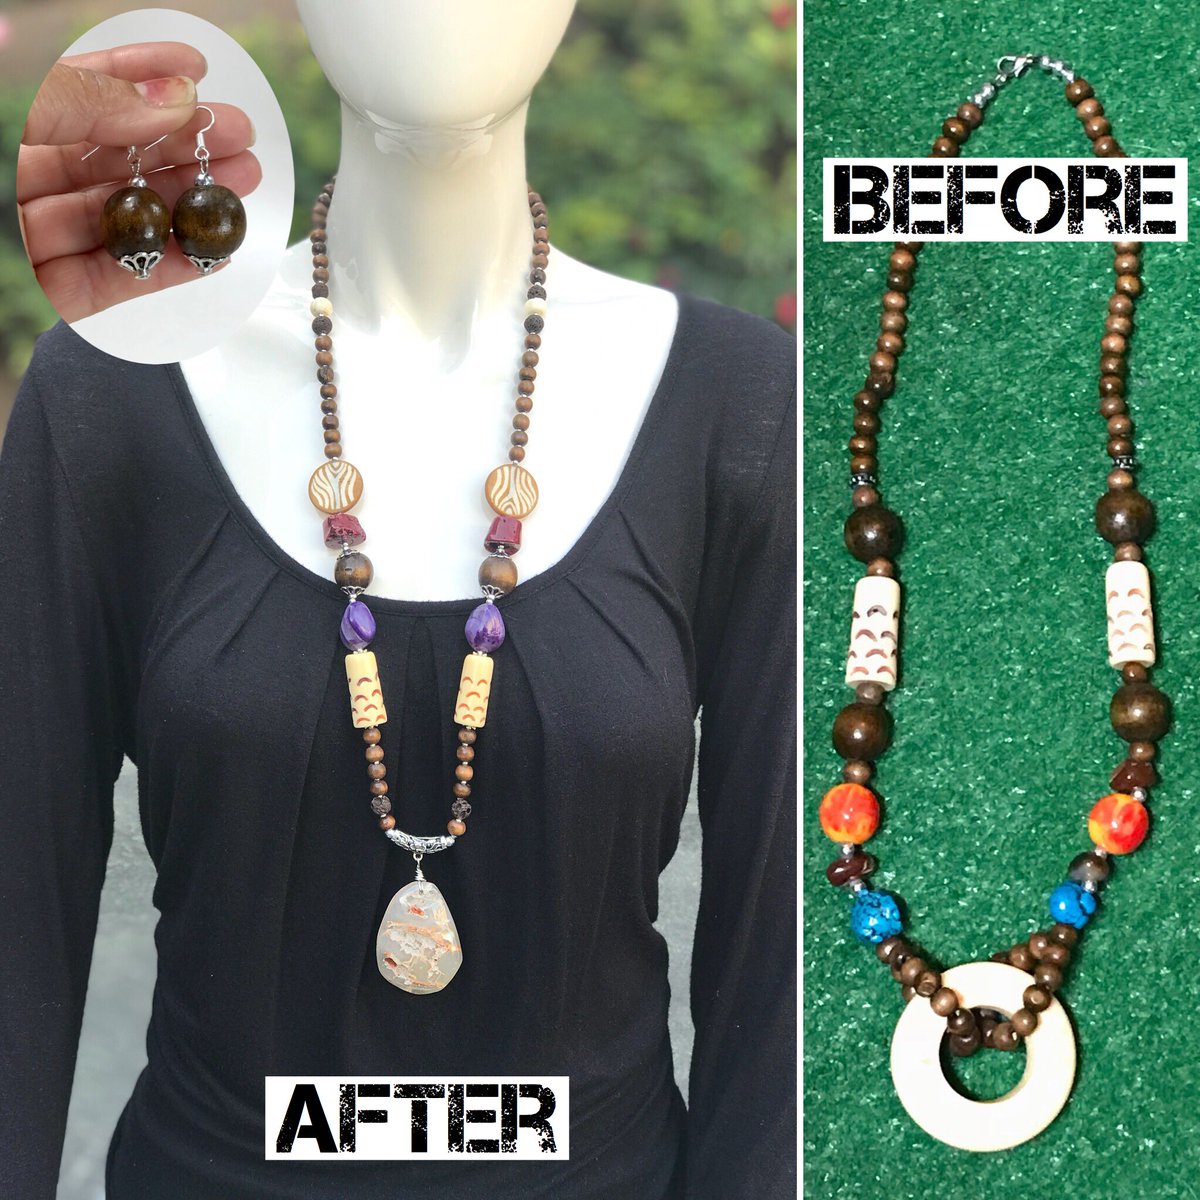 #upcycle the #oldbeads #oldjewelry and create something #fashion 
Message to set up a time